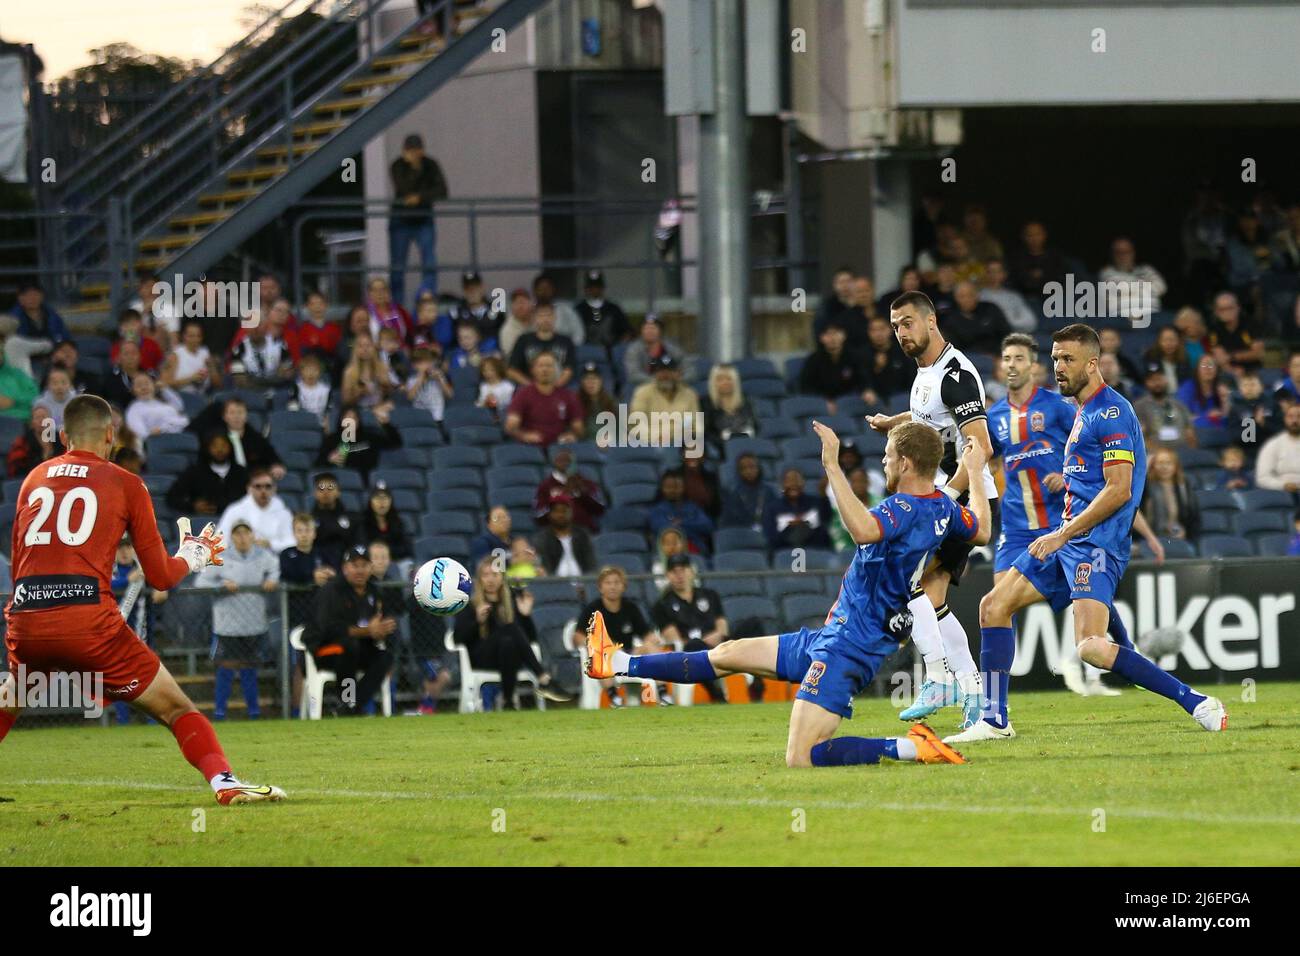 1st May 2022, Campbeltown  Sports Stadium, Sydney, NSW, Australia: A-League football, Macarthur FC versus Newcastle Jets; Tomi Juric of Macarthur FC's effort on goal is stopped by keeper Michael Weier of Newcastle Jets Stock Photo